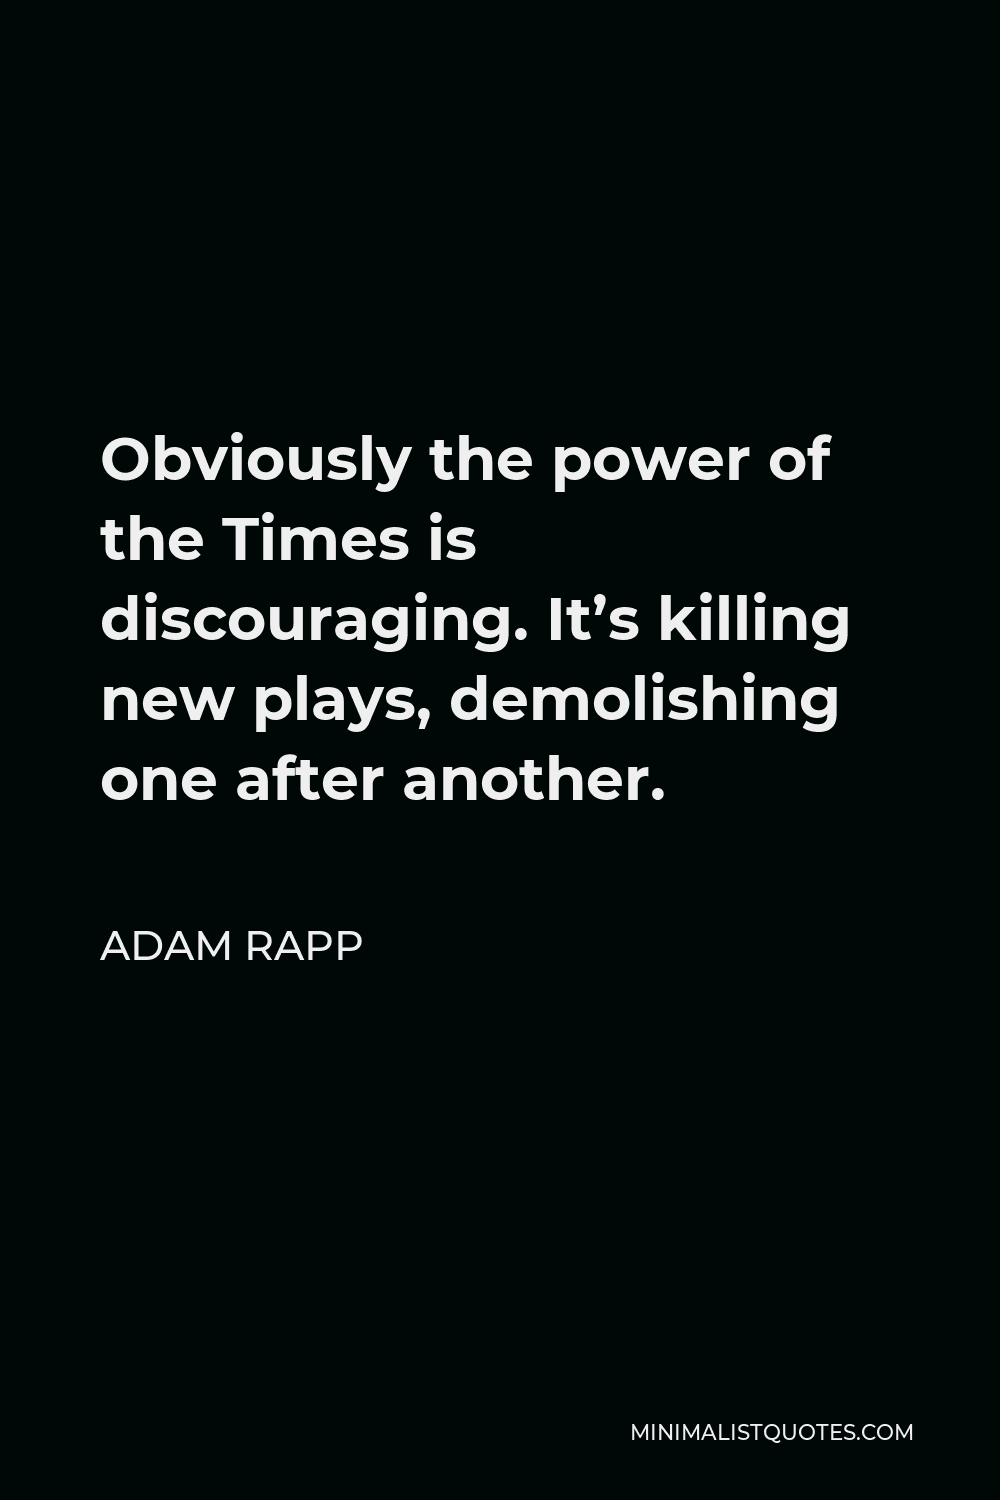 Adam Rapp Quote - Obviously the power of the Times is discouraging. It’s killing new plays, demolishing one after another.